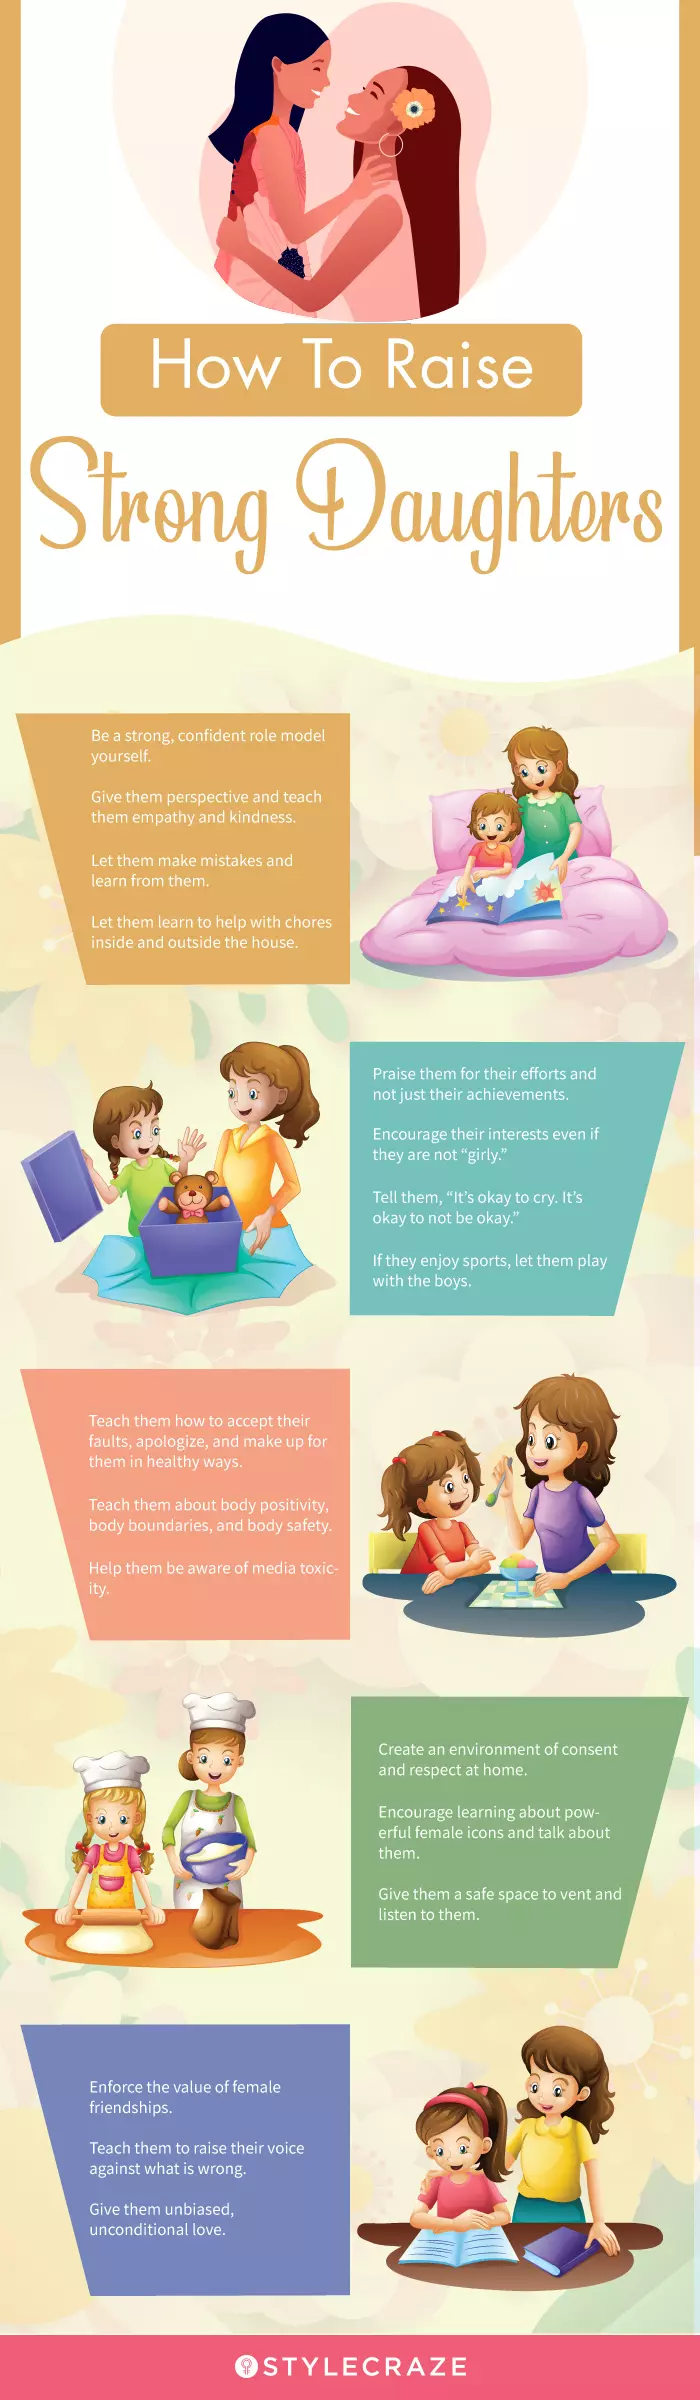 how to raise strong daughters (infographic)